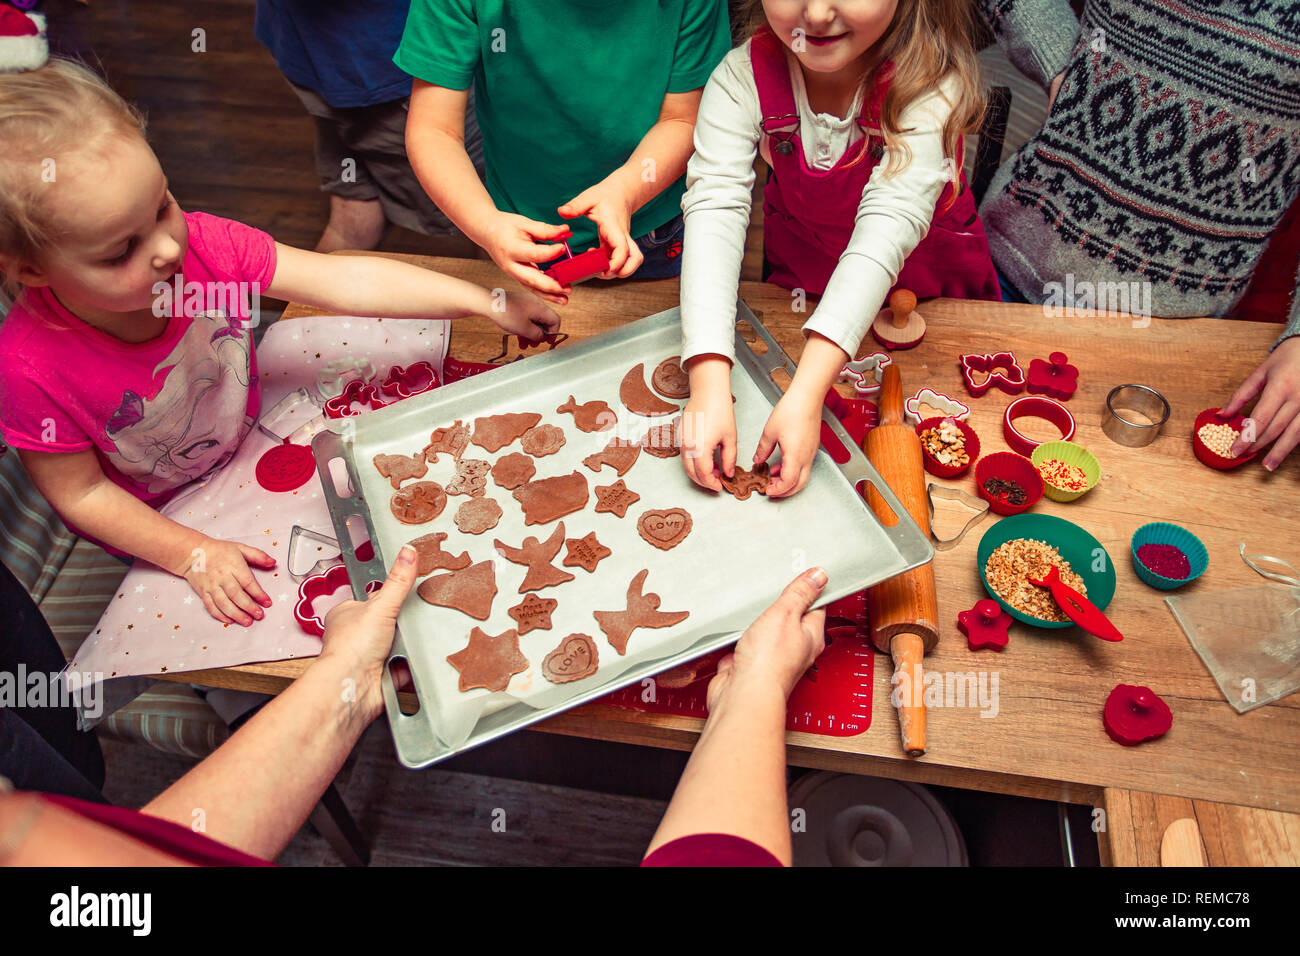 Baking Christmas cookies. Christmas gingerbread cookies in many shapes decorated with colorful frosting, sprinkle, icing, chocolate coating, toppers,  Stock Photo